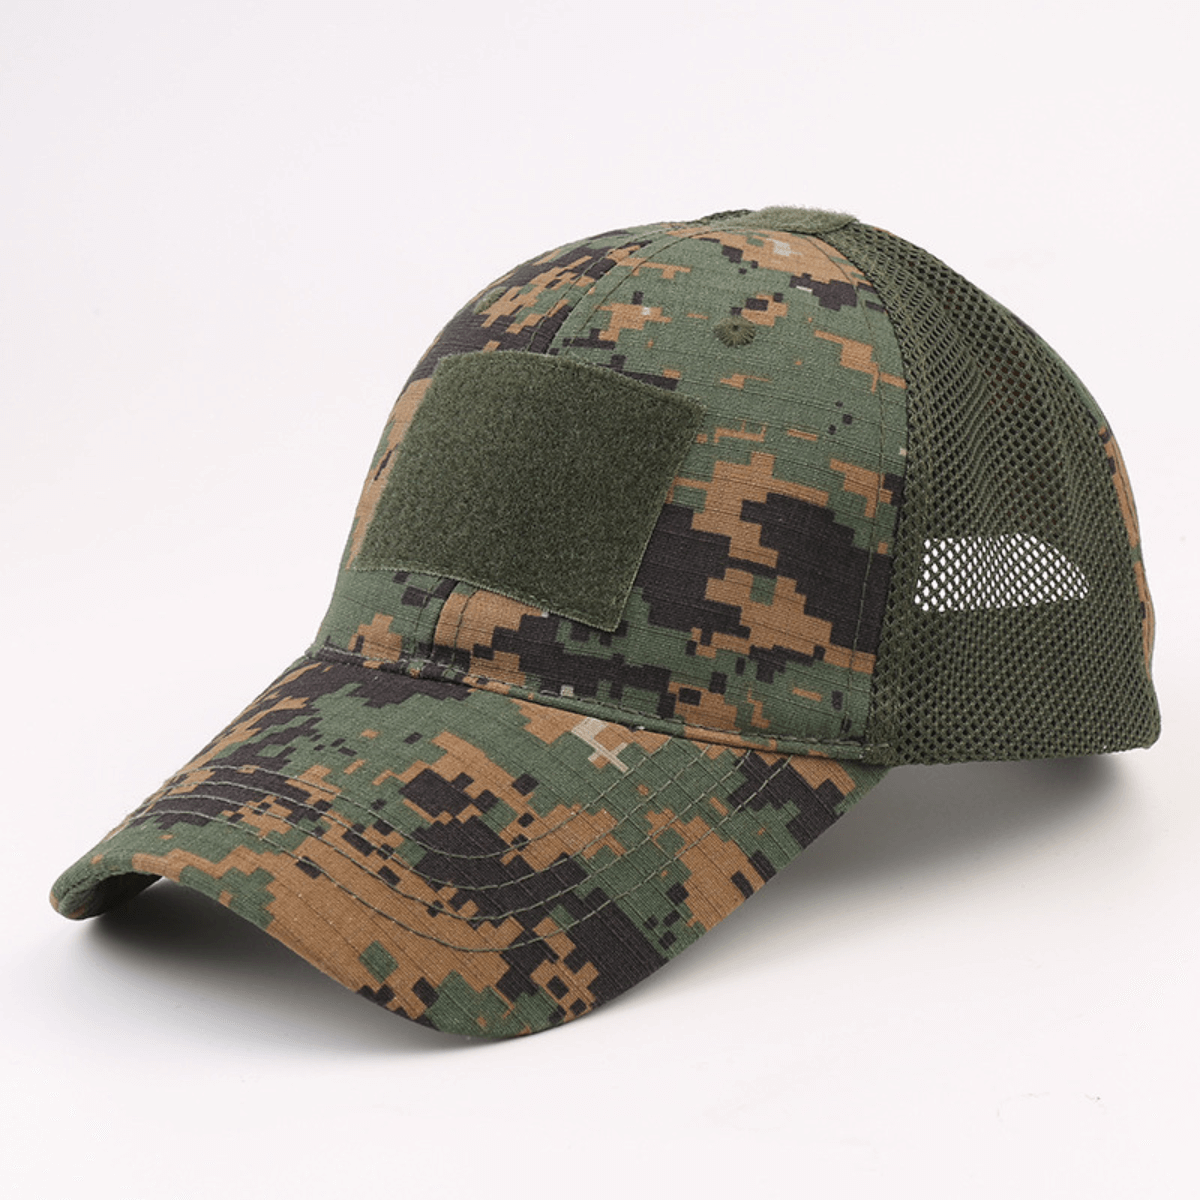 Military-Style Tactical Patch Hat Adjustable Urbanheer – Strap with